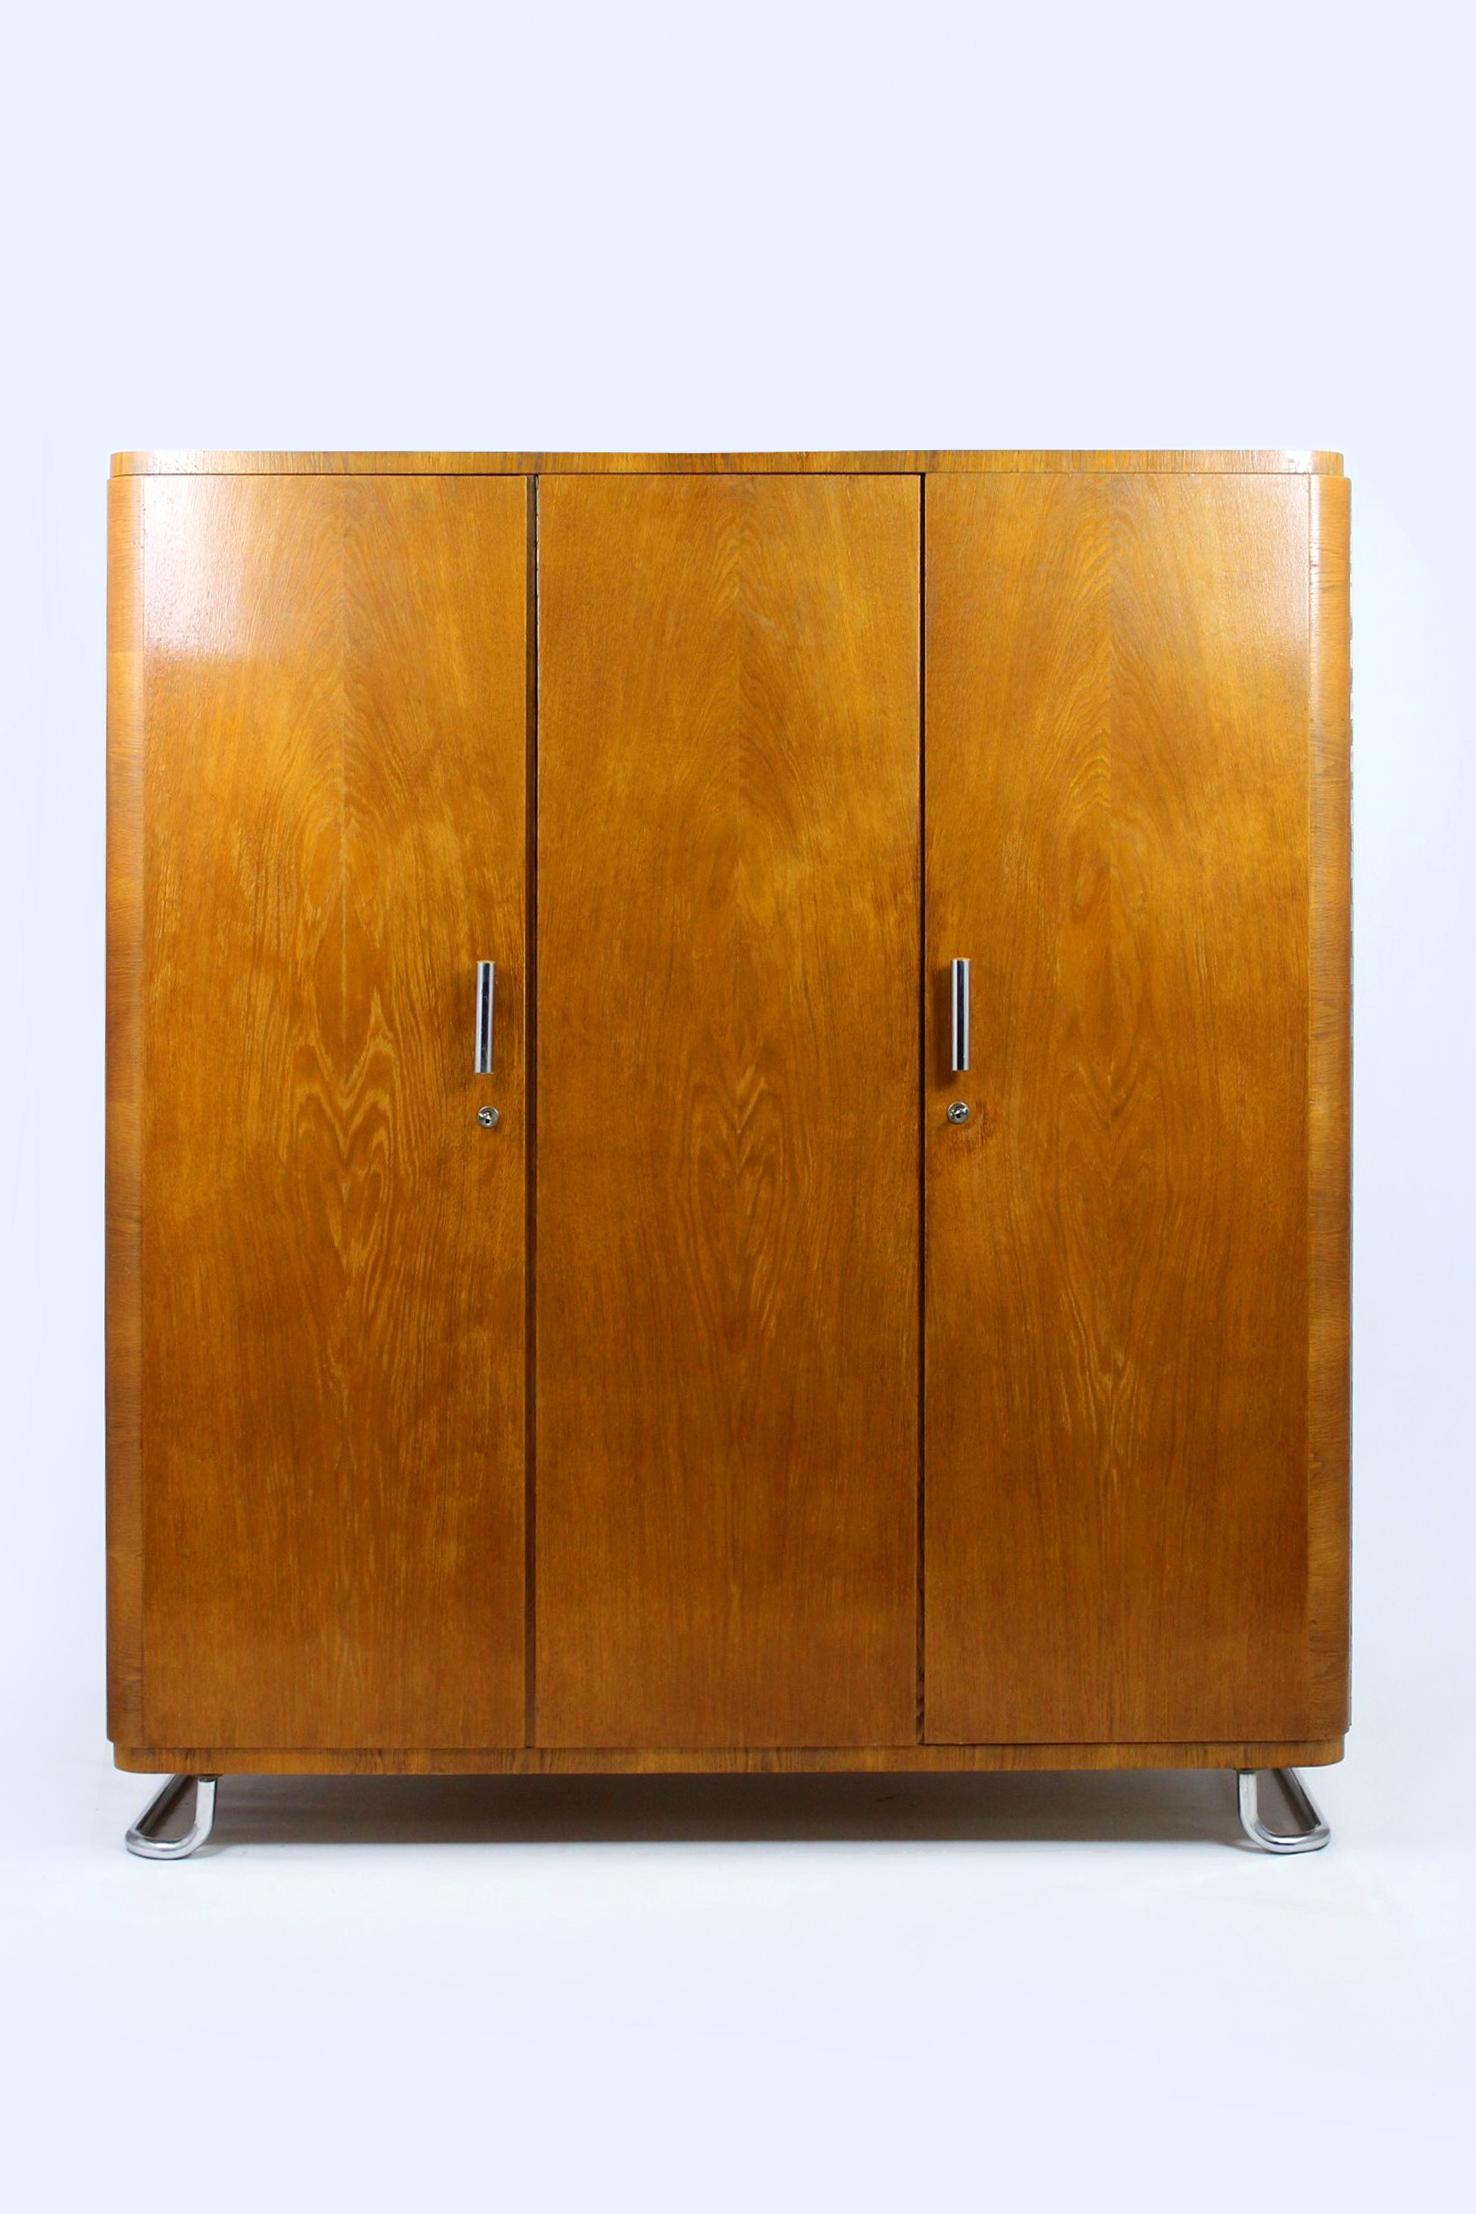 This Bauhaus-style wardrobe was produced by Hynek Gottwald in Czechoslovakia in the 1930s. Features three doors, an internal clothes rail and five shelves. The wardrobe stands on chromed feet and has chromed cylinder handles. The wardrobe is in